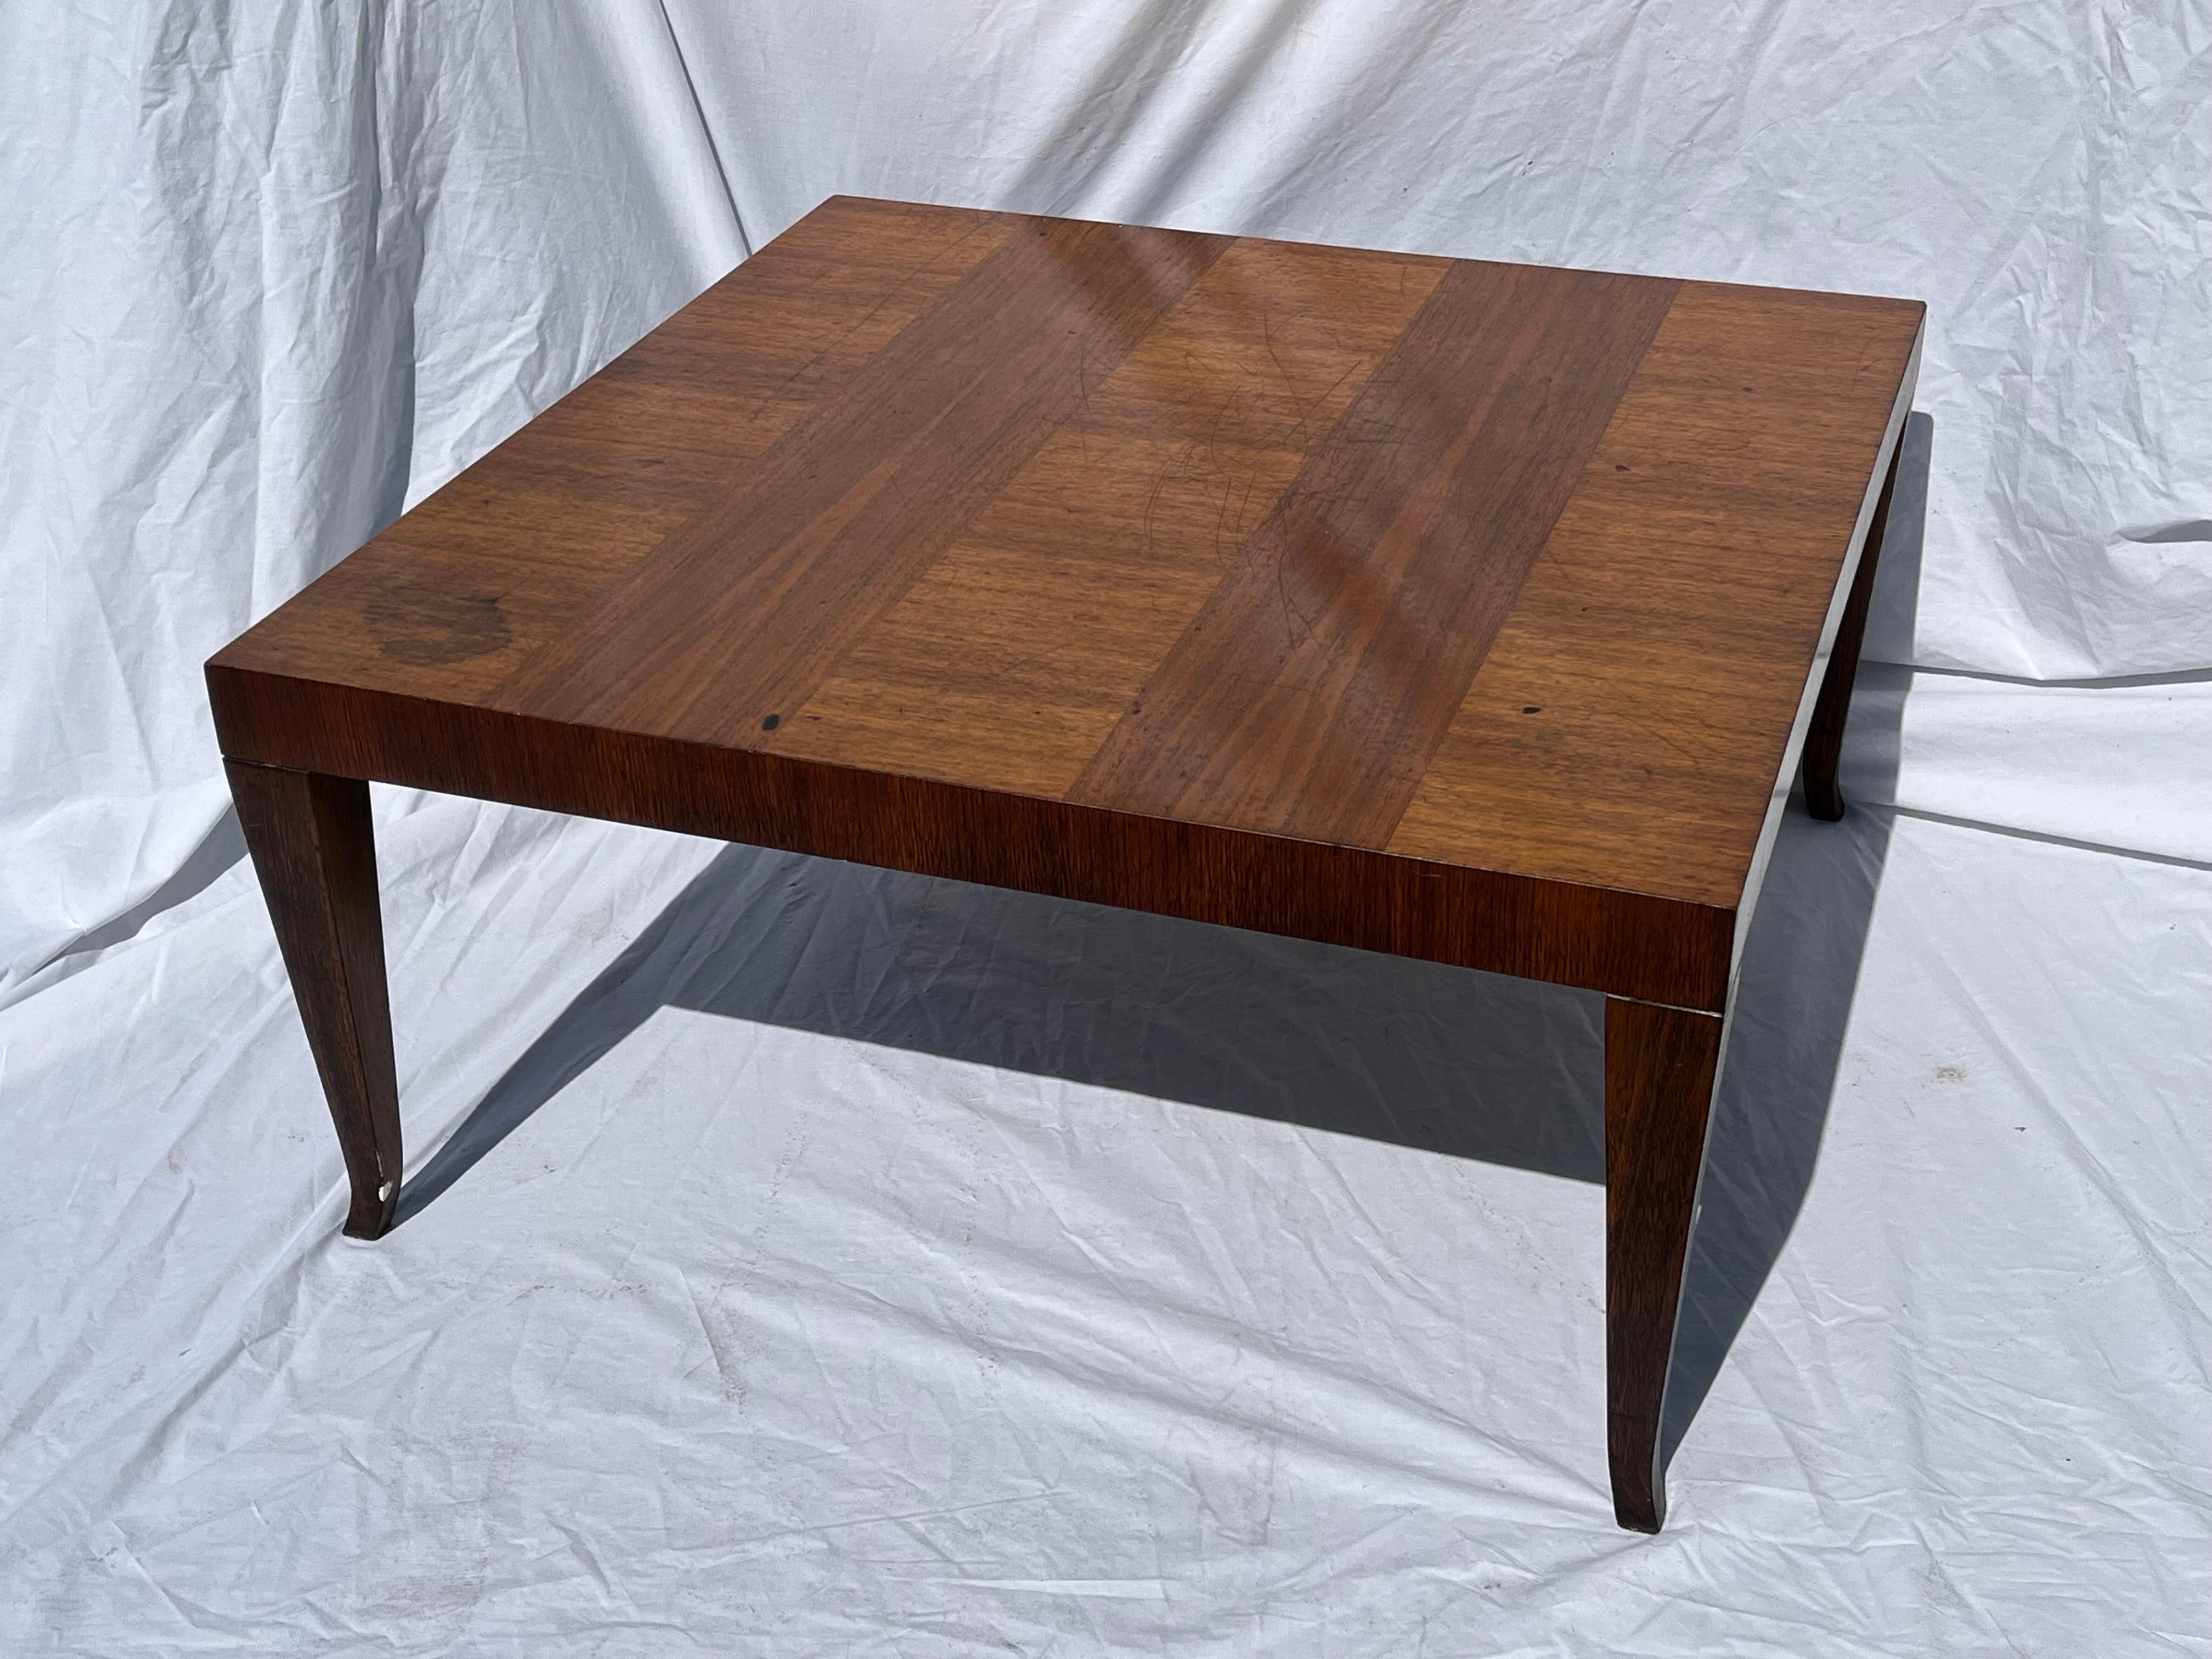 A Mid-20th century, circa 1950s coffee table designed by T. H. Robsjohn-Gibbings for Widdicomb. The beautifully grained wood is expressed in a strip design on the top of the table. The slightly splayed, saber style legs elegantly support the large